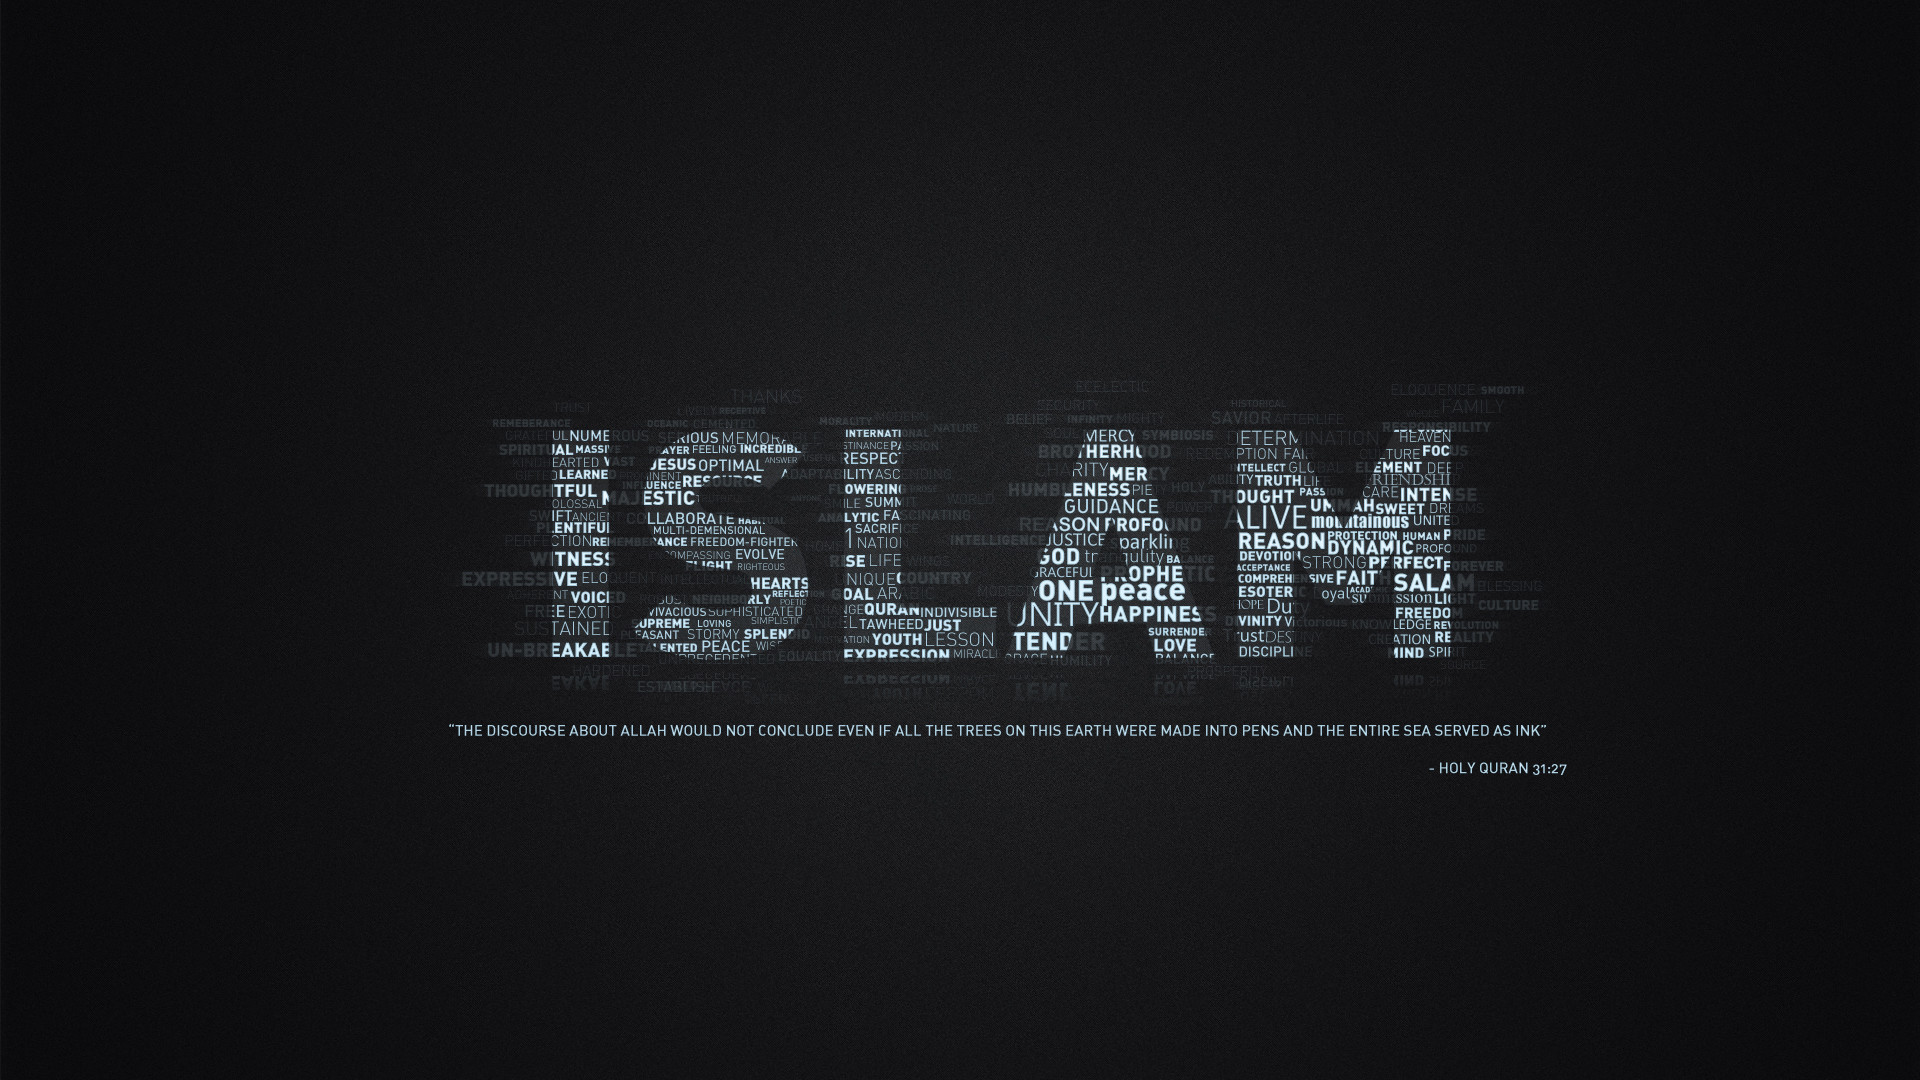 1920x1080  Free Download Islamic Desktop Wallpapers and Pictures